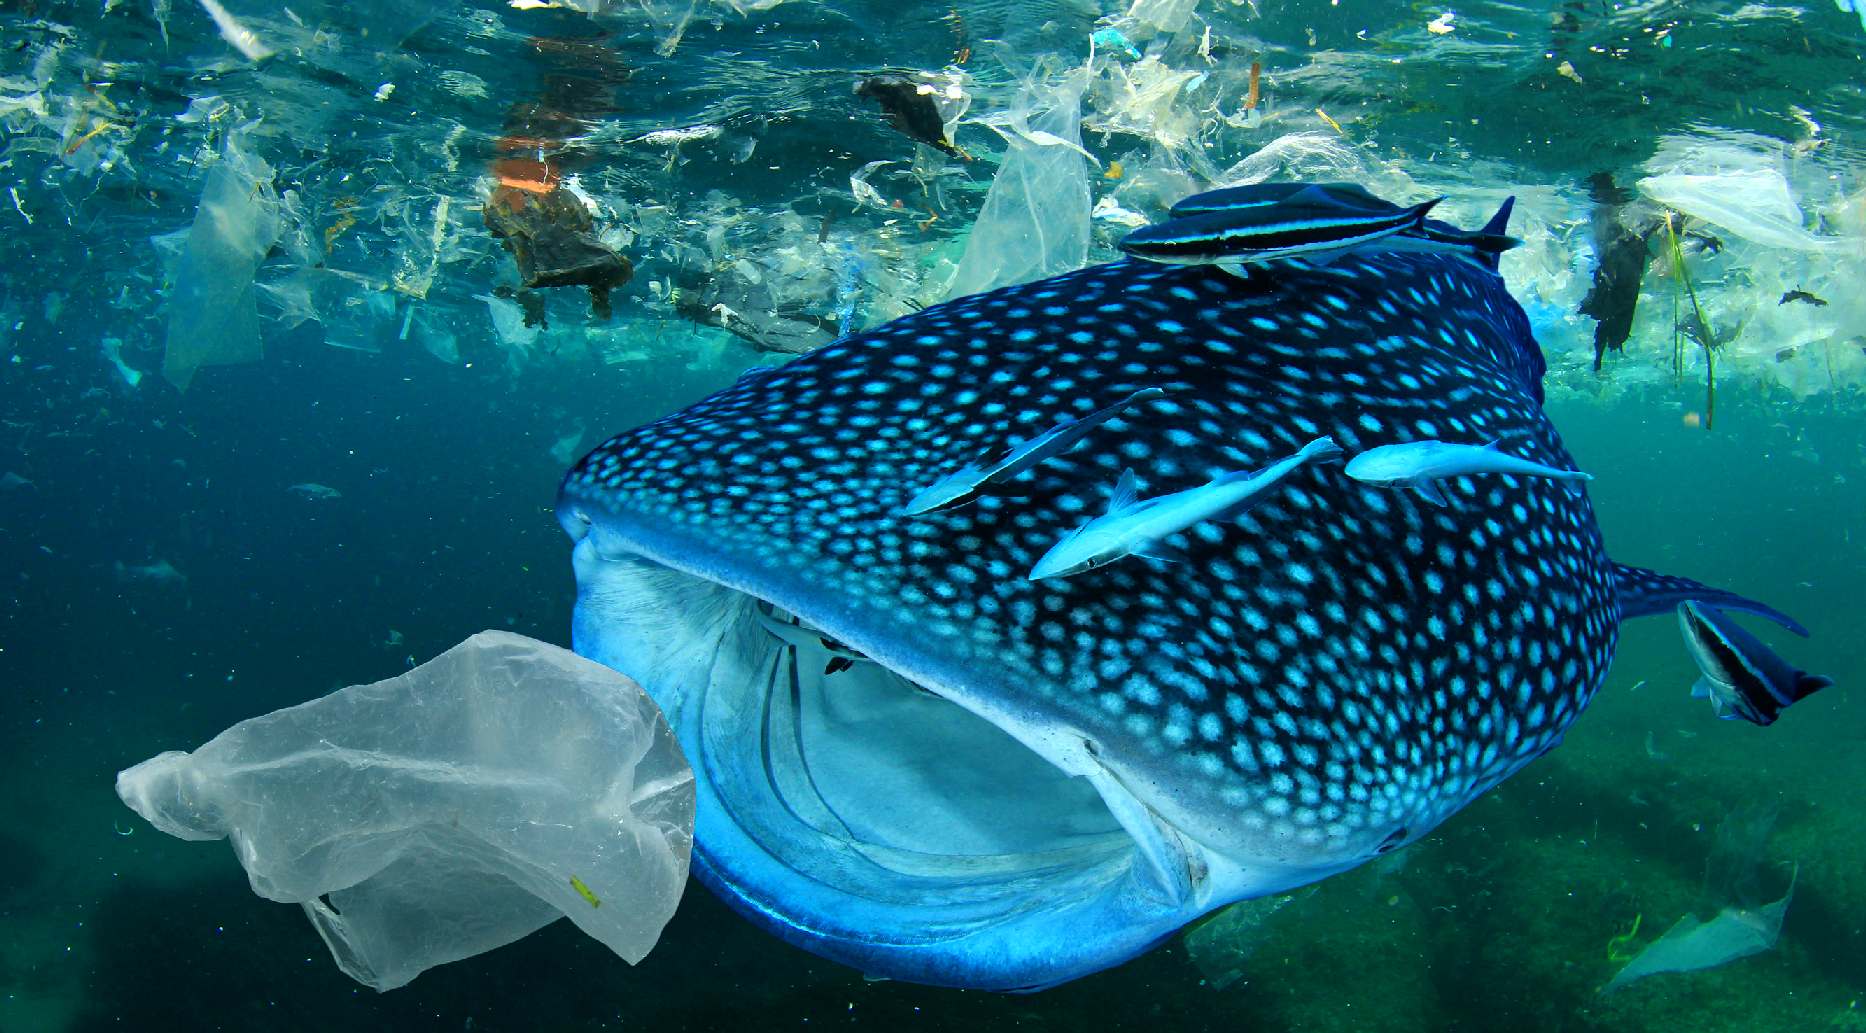 Whale shark about to eat a plastic bag